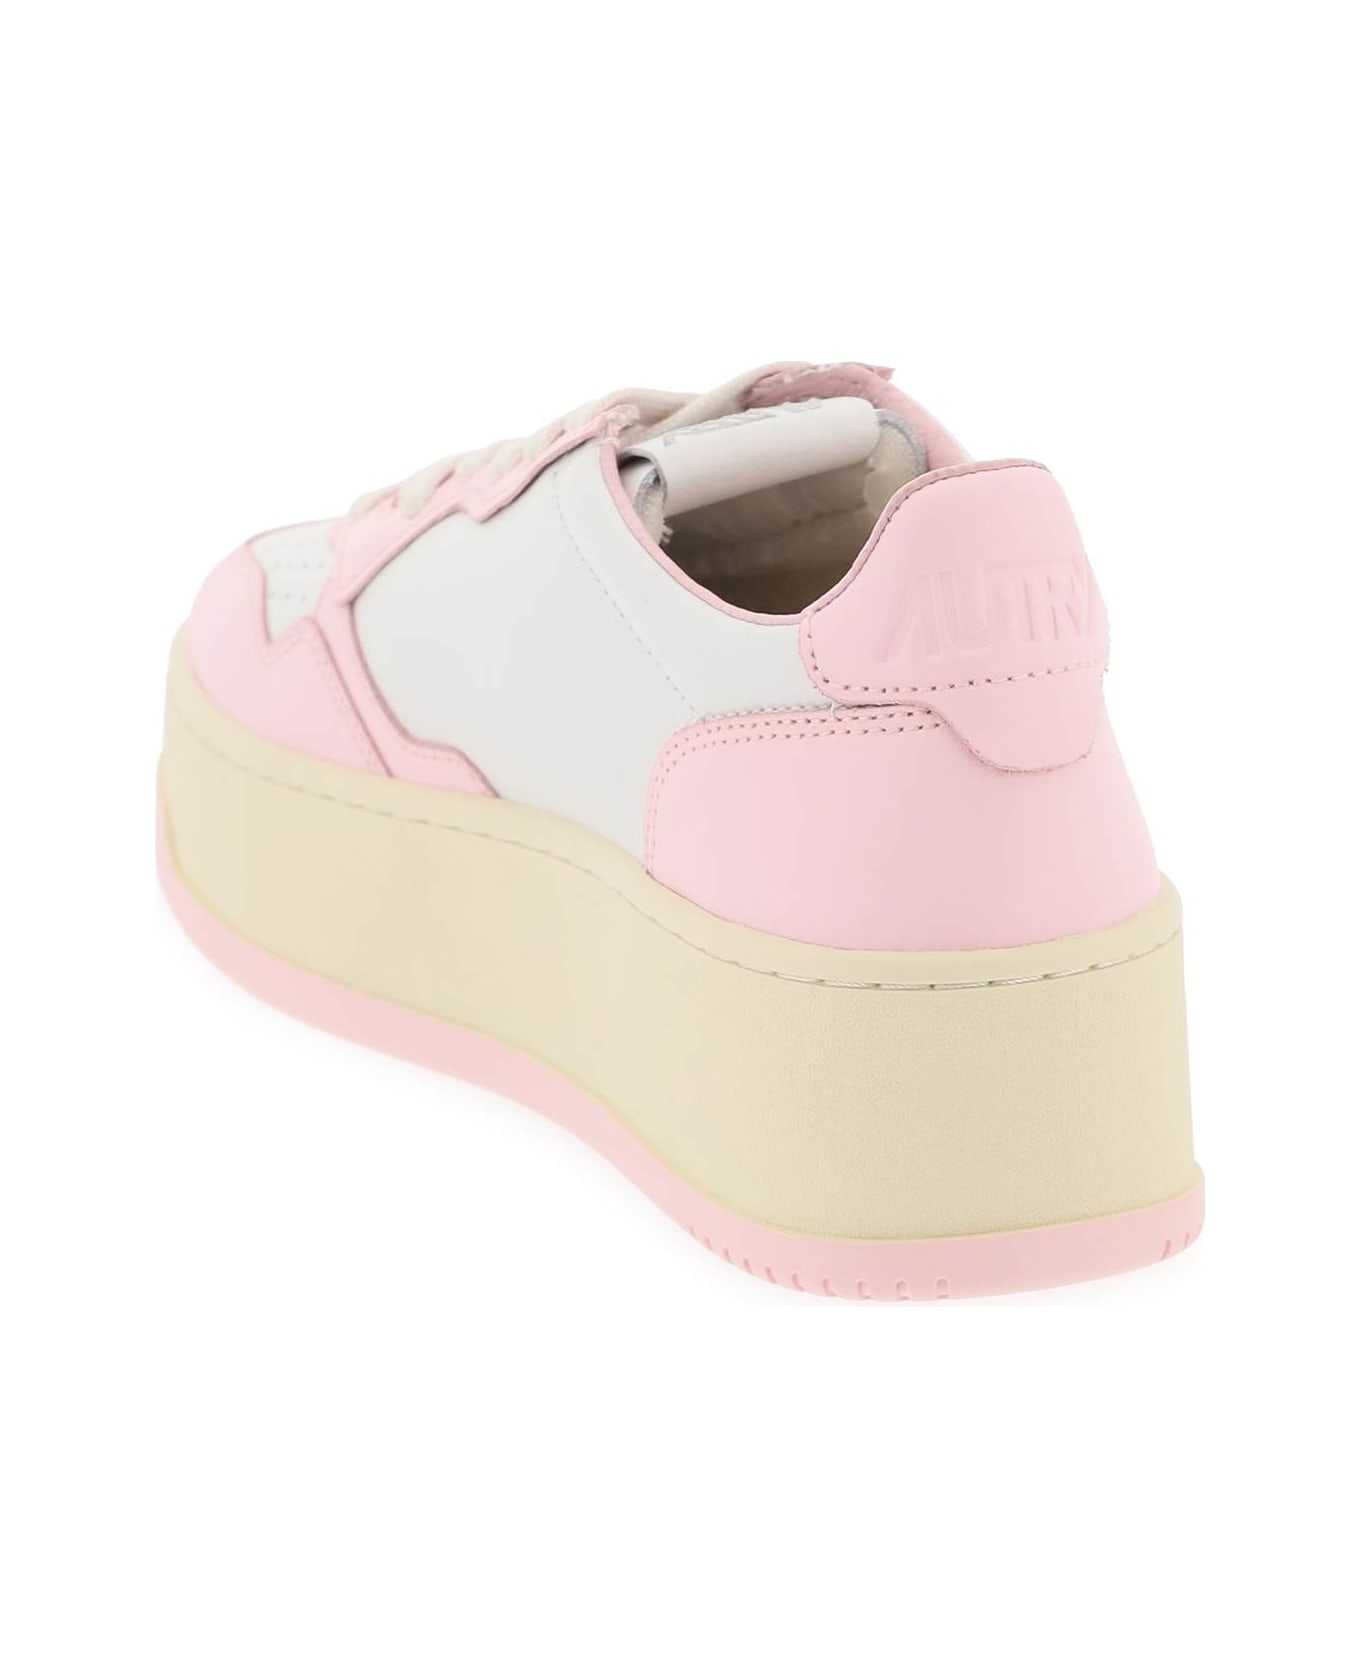 Autry Medalist Low Sneakers - BLUSH BRIDE (White)